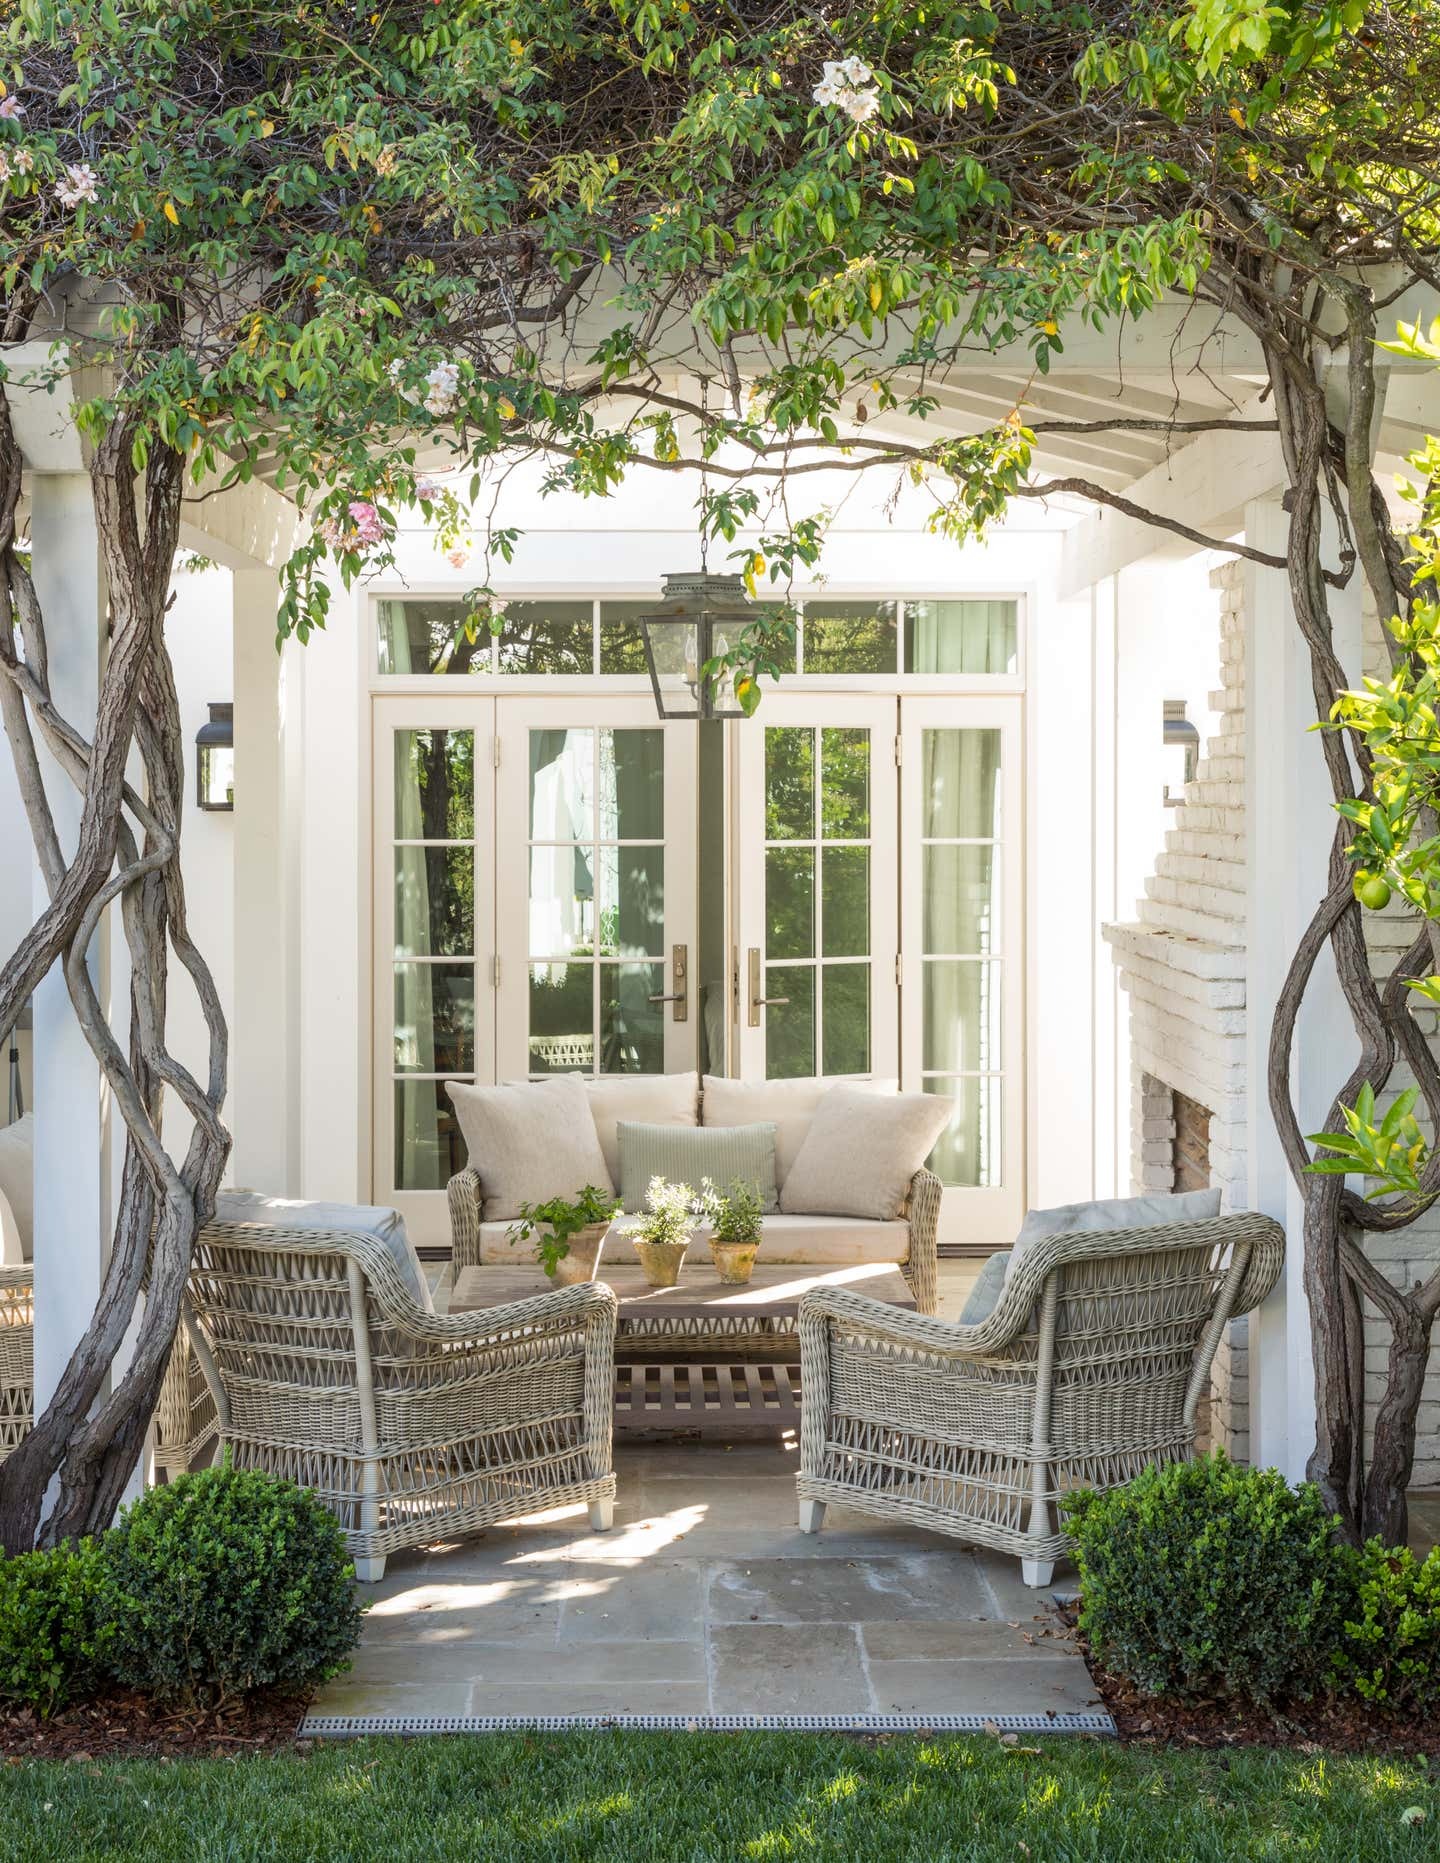 Get The Look: A Classic Patio